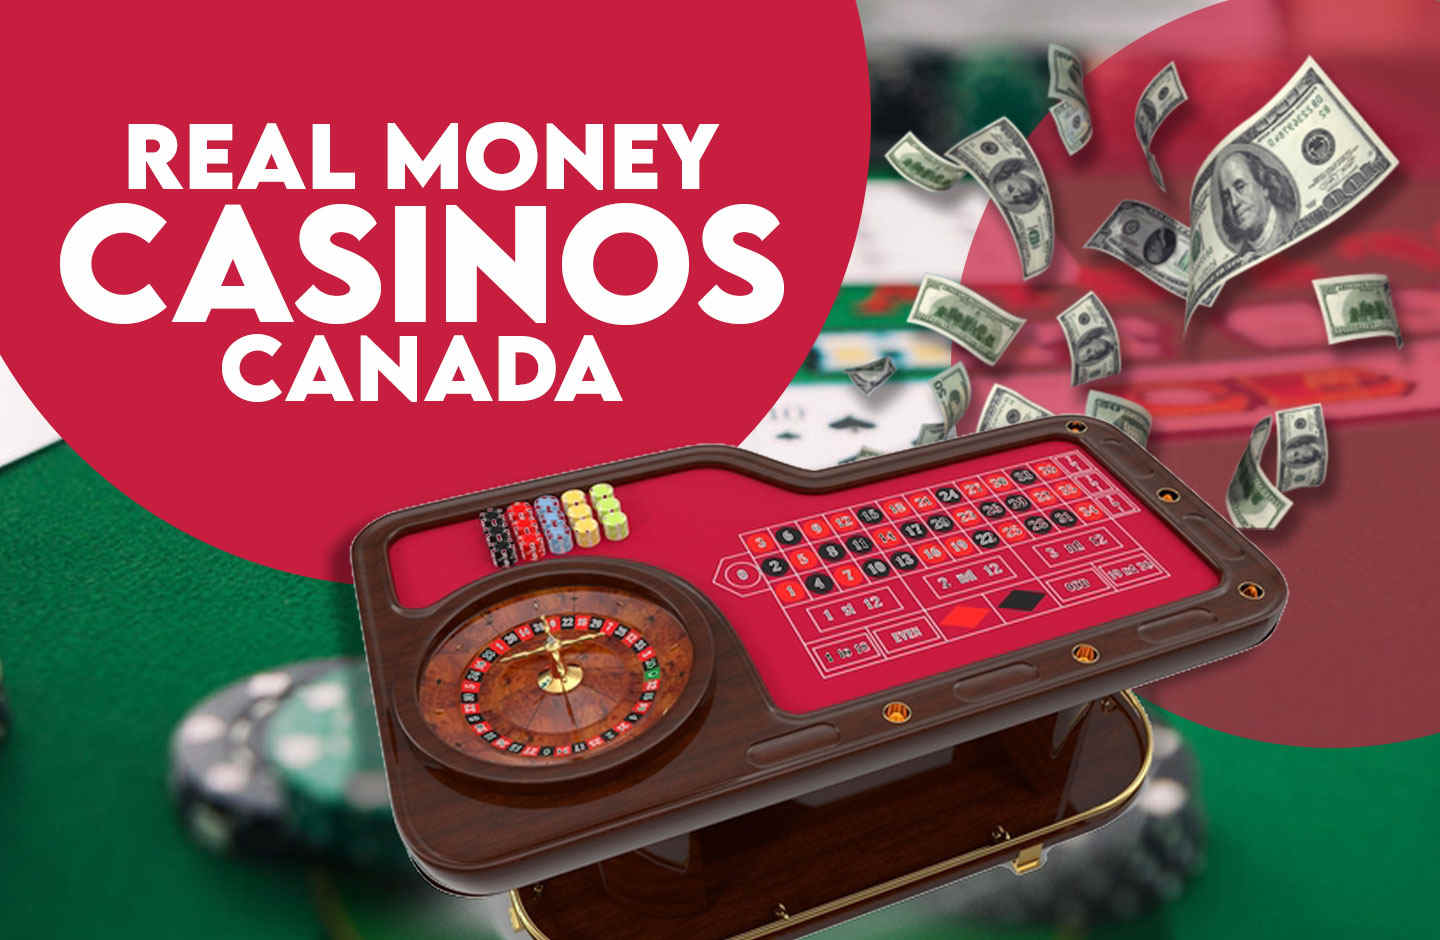 How To Win Friends And Influence People with canadian gambling sites